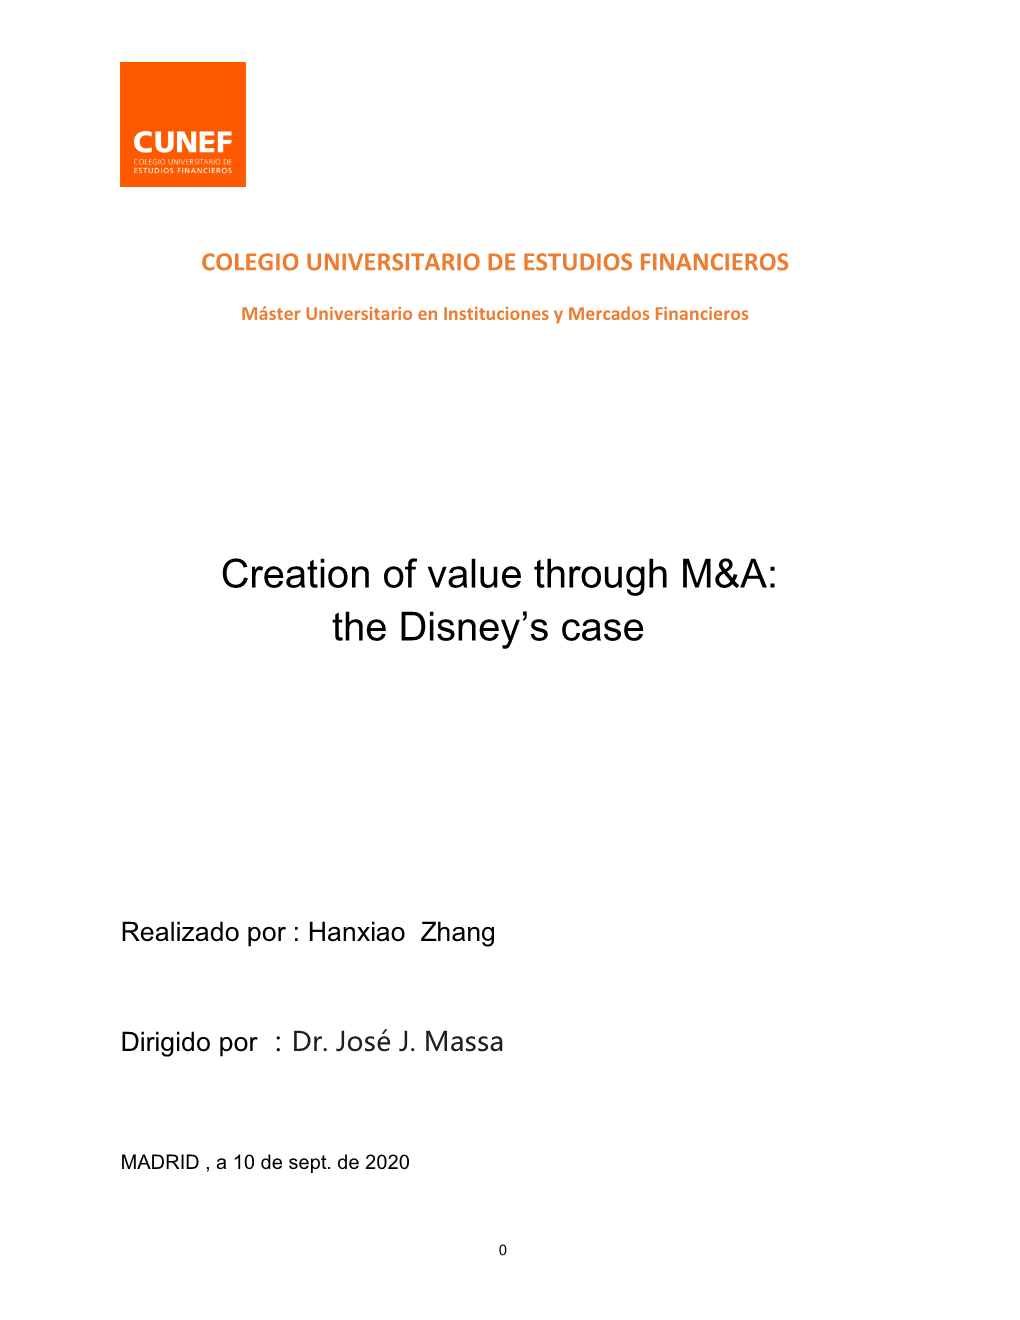 Creation of Value Through M&A: the Disney's Case